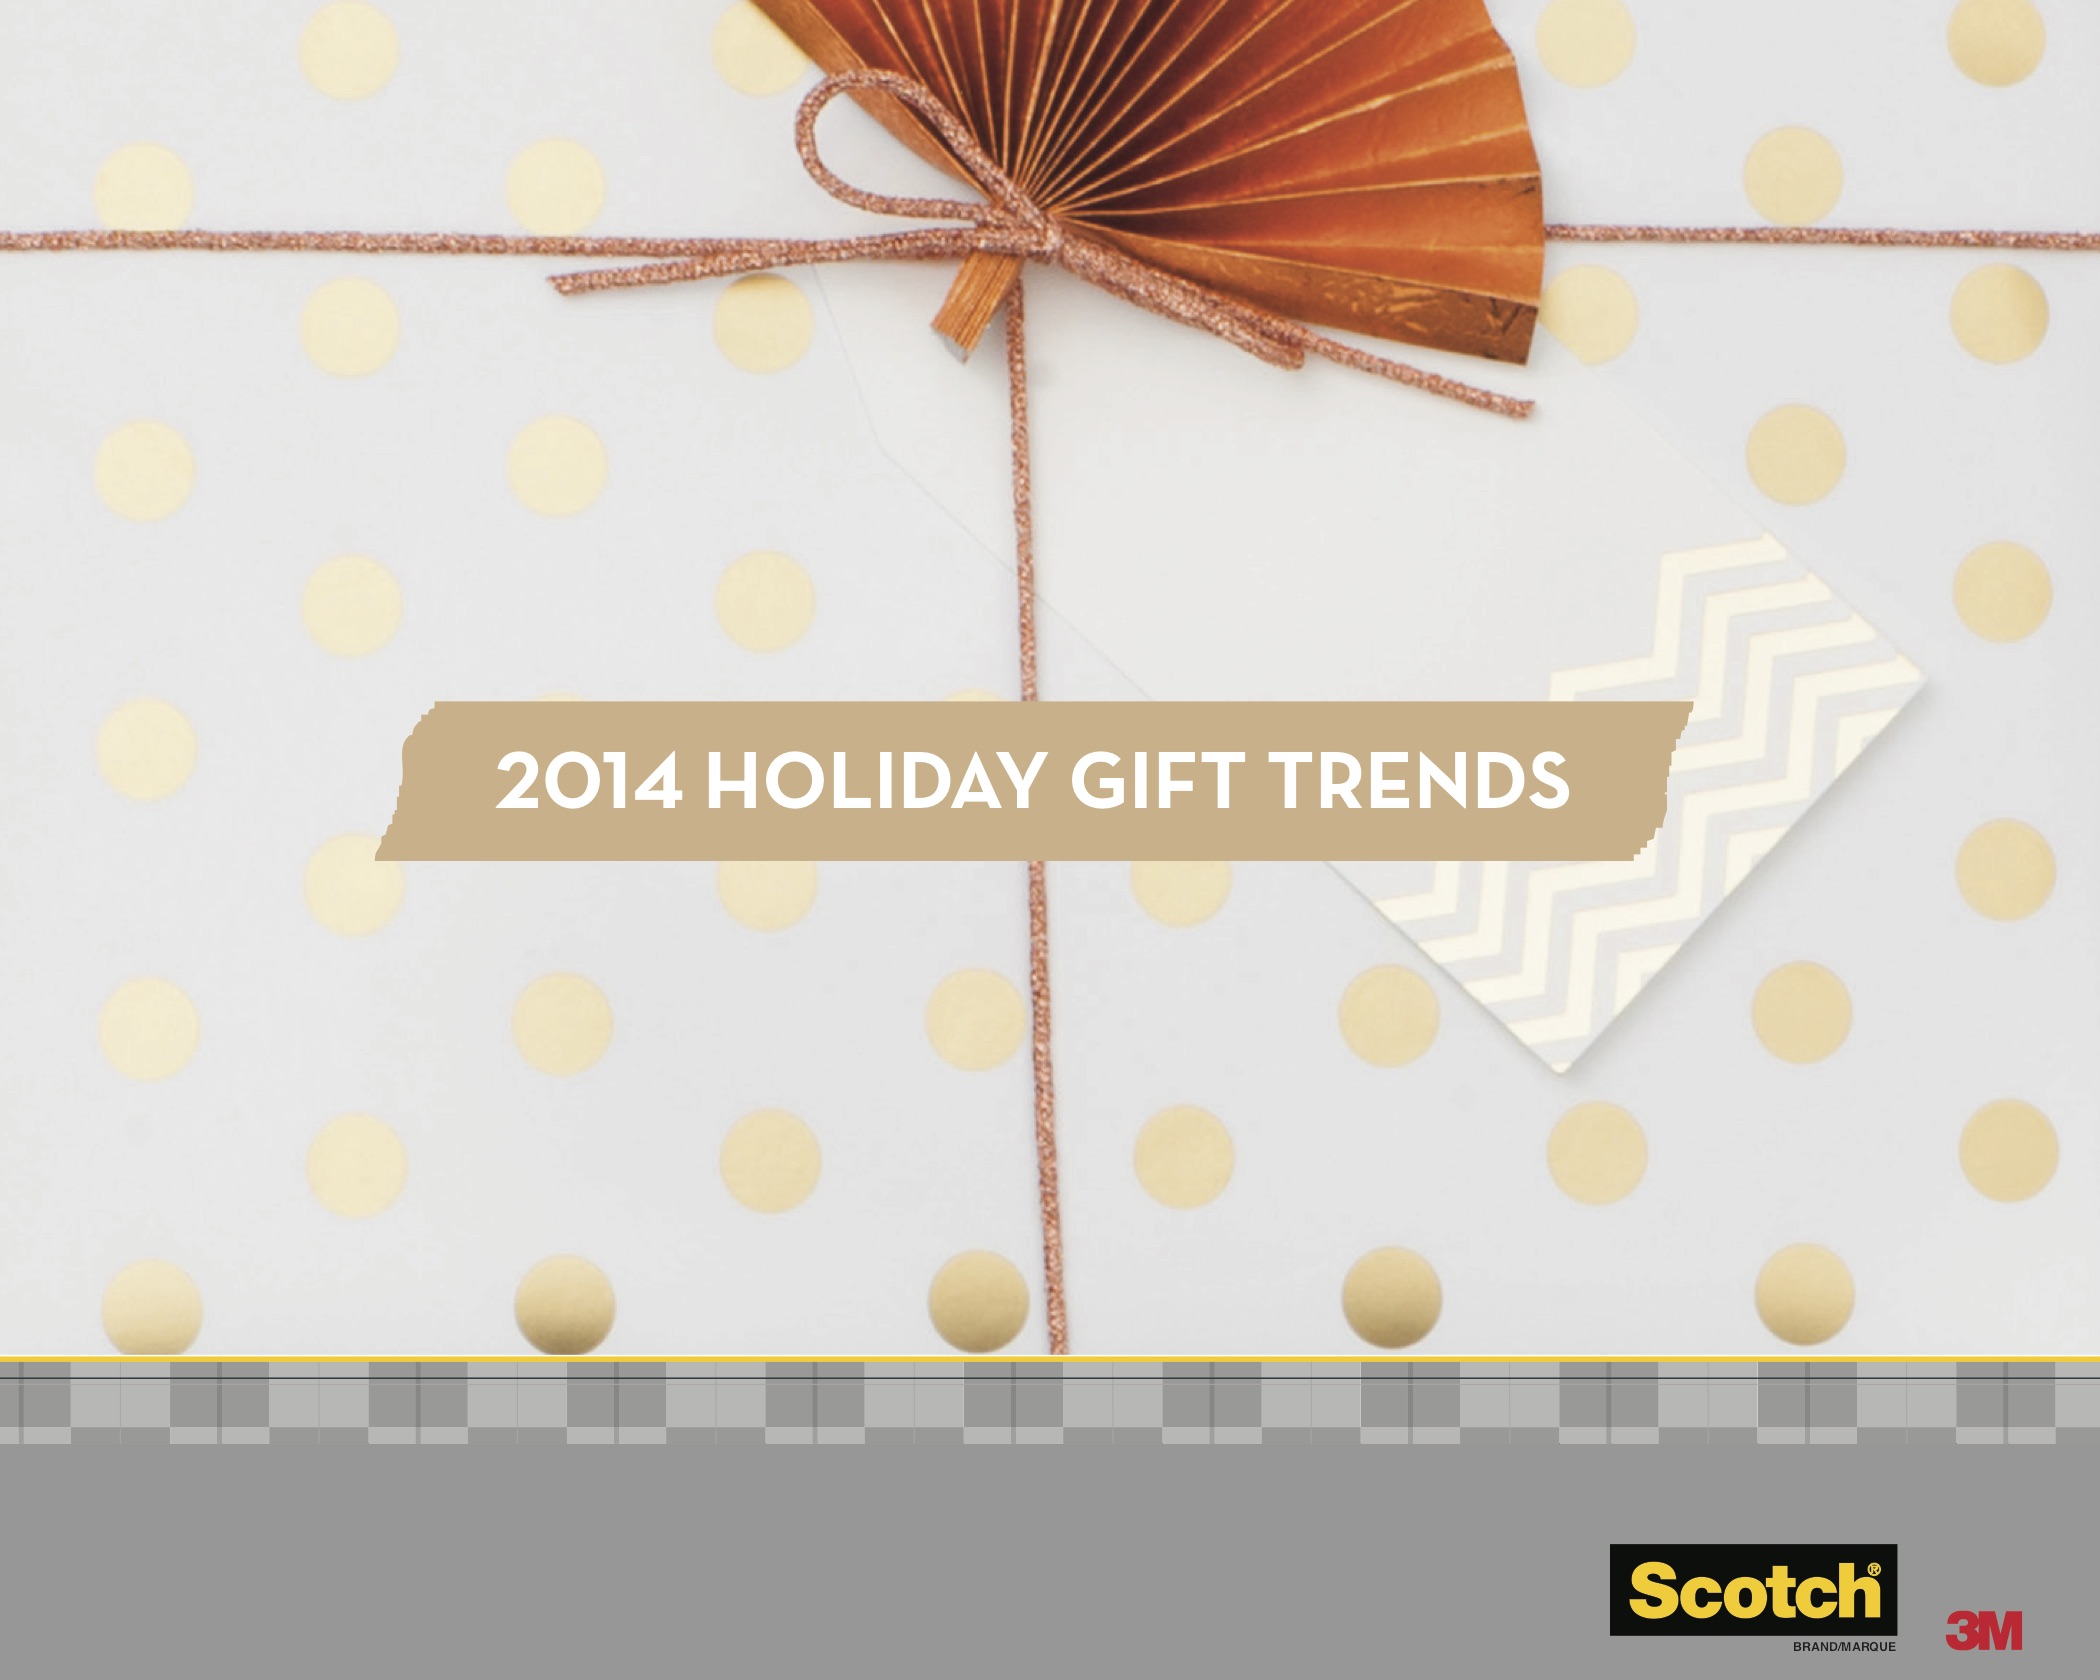 Scotch Brand Canada 2014 Holiday Gift Trends